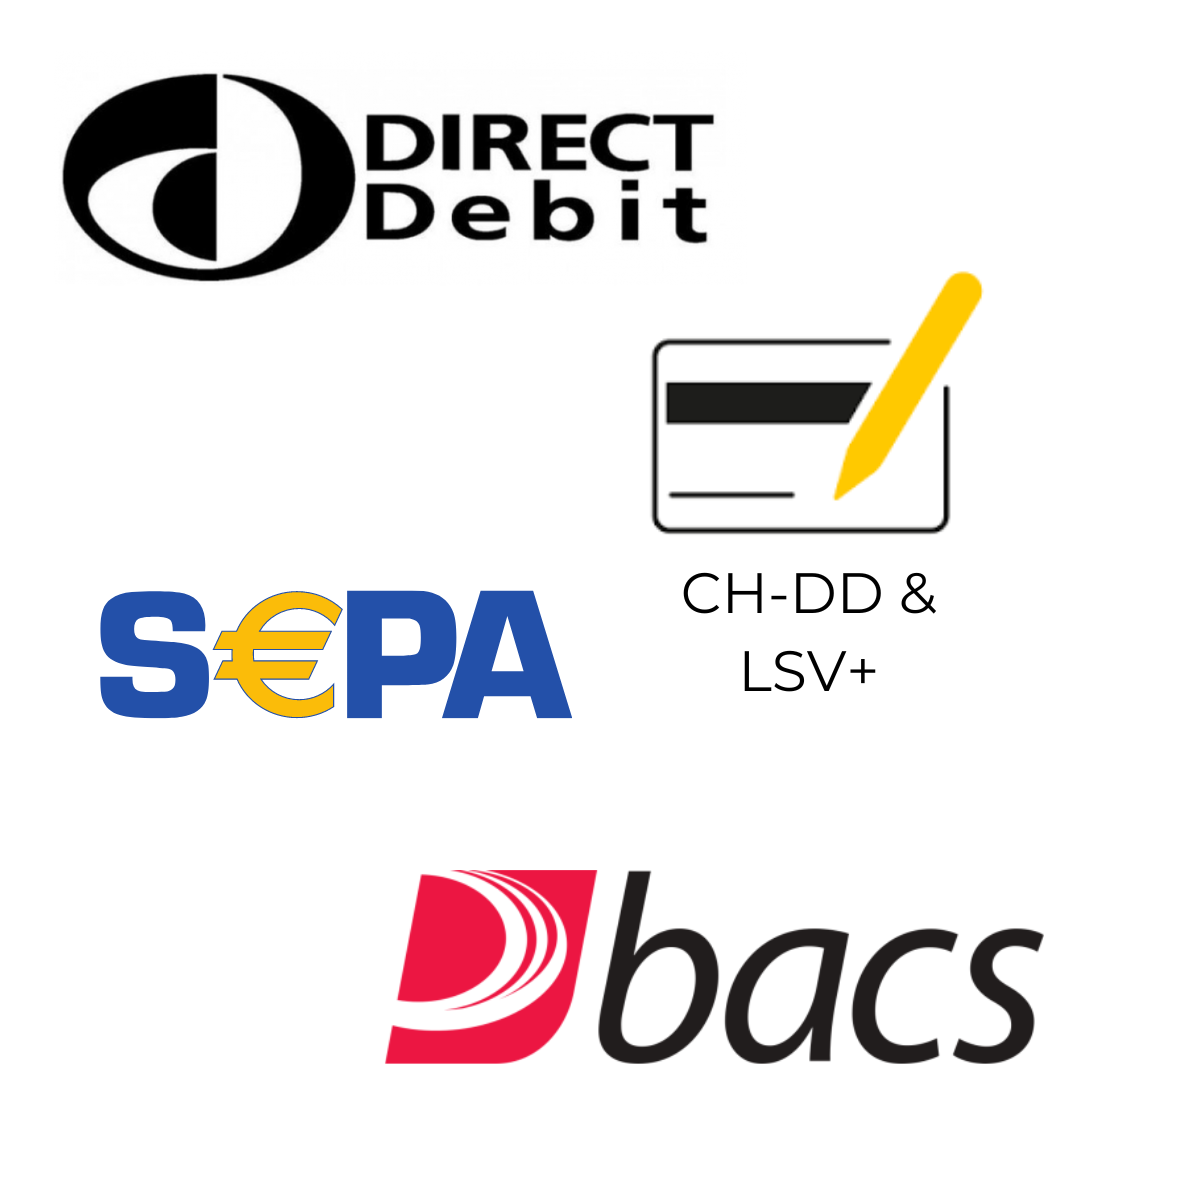 image of FinDock's supported Direct Debit schemes